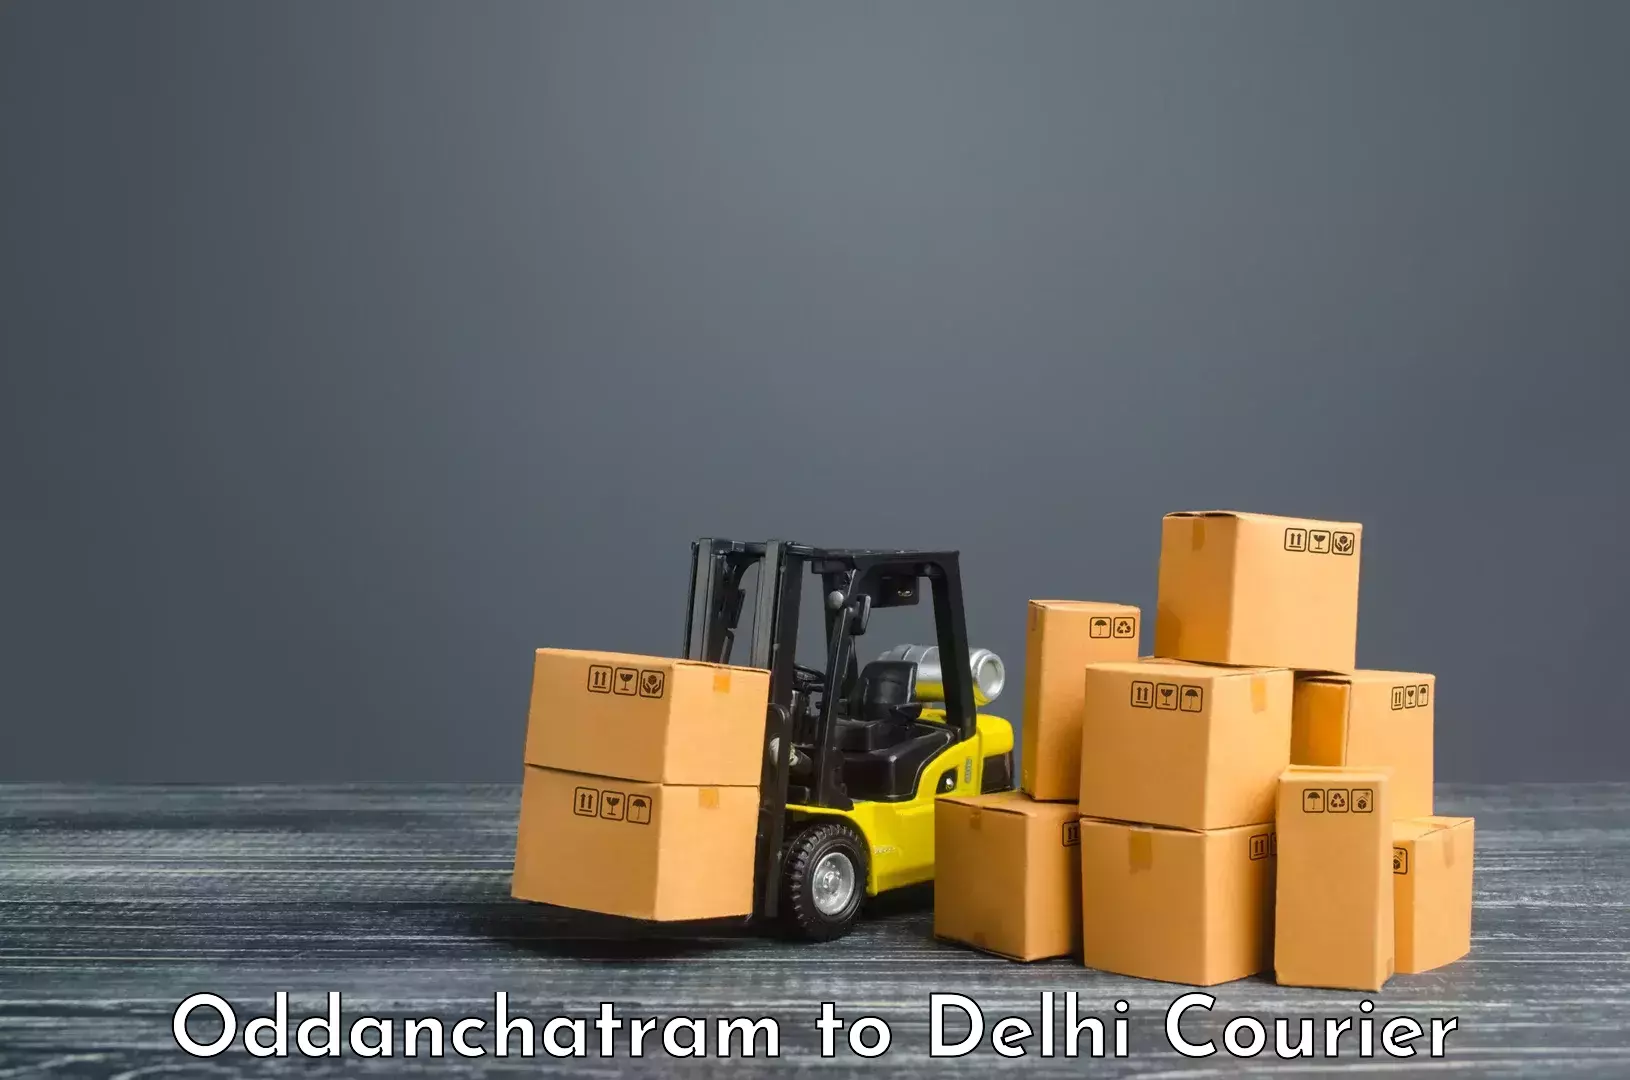 Advanced shipping services Oddanchatram to Lodhi Road